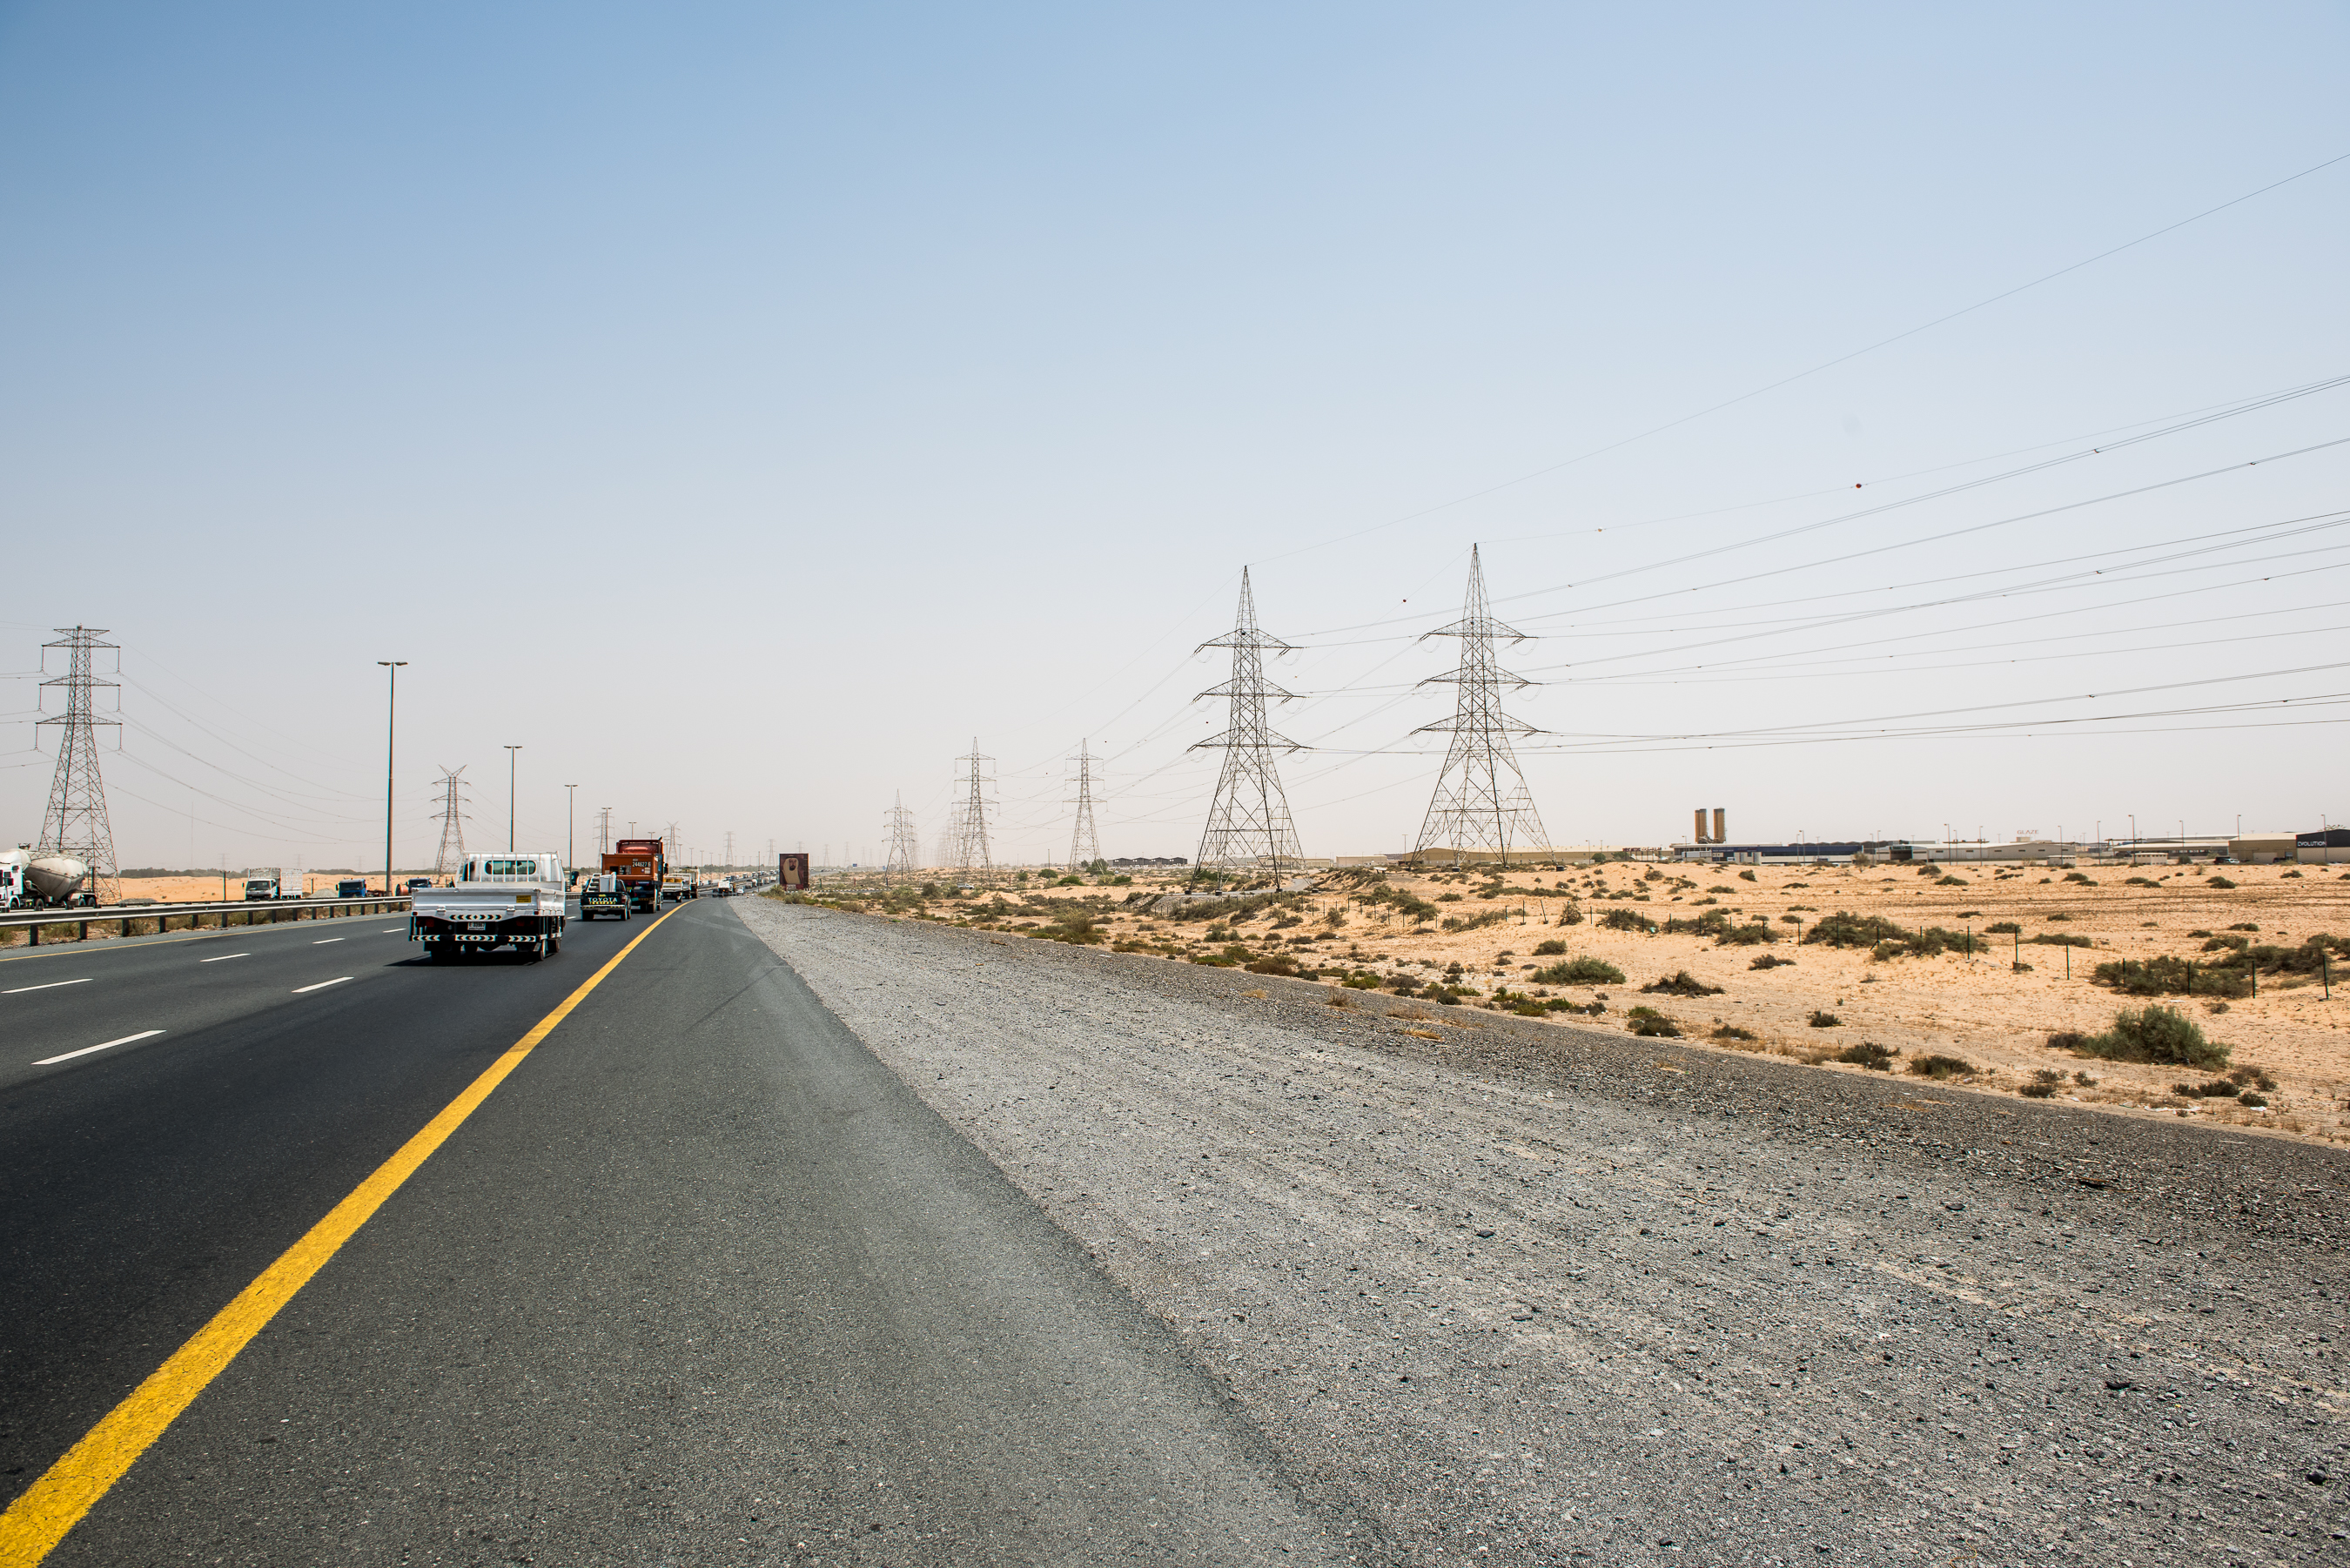 Emirates Industrial for Cities Industrial lands in Sharjah with better connectivity